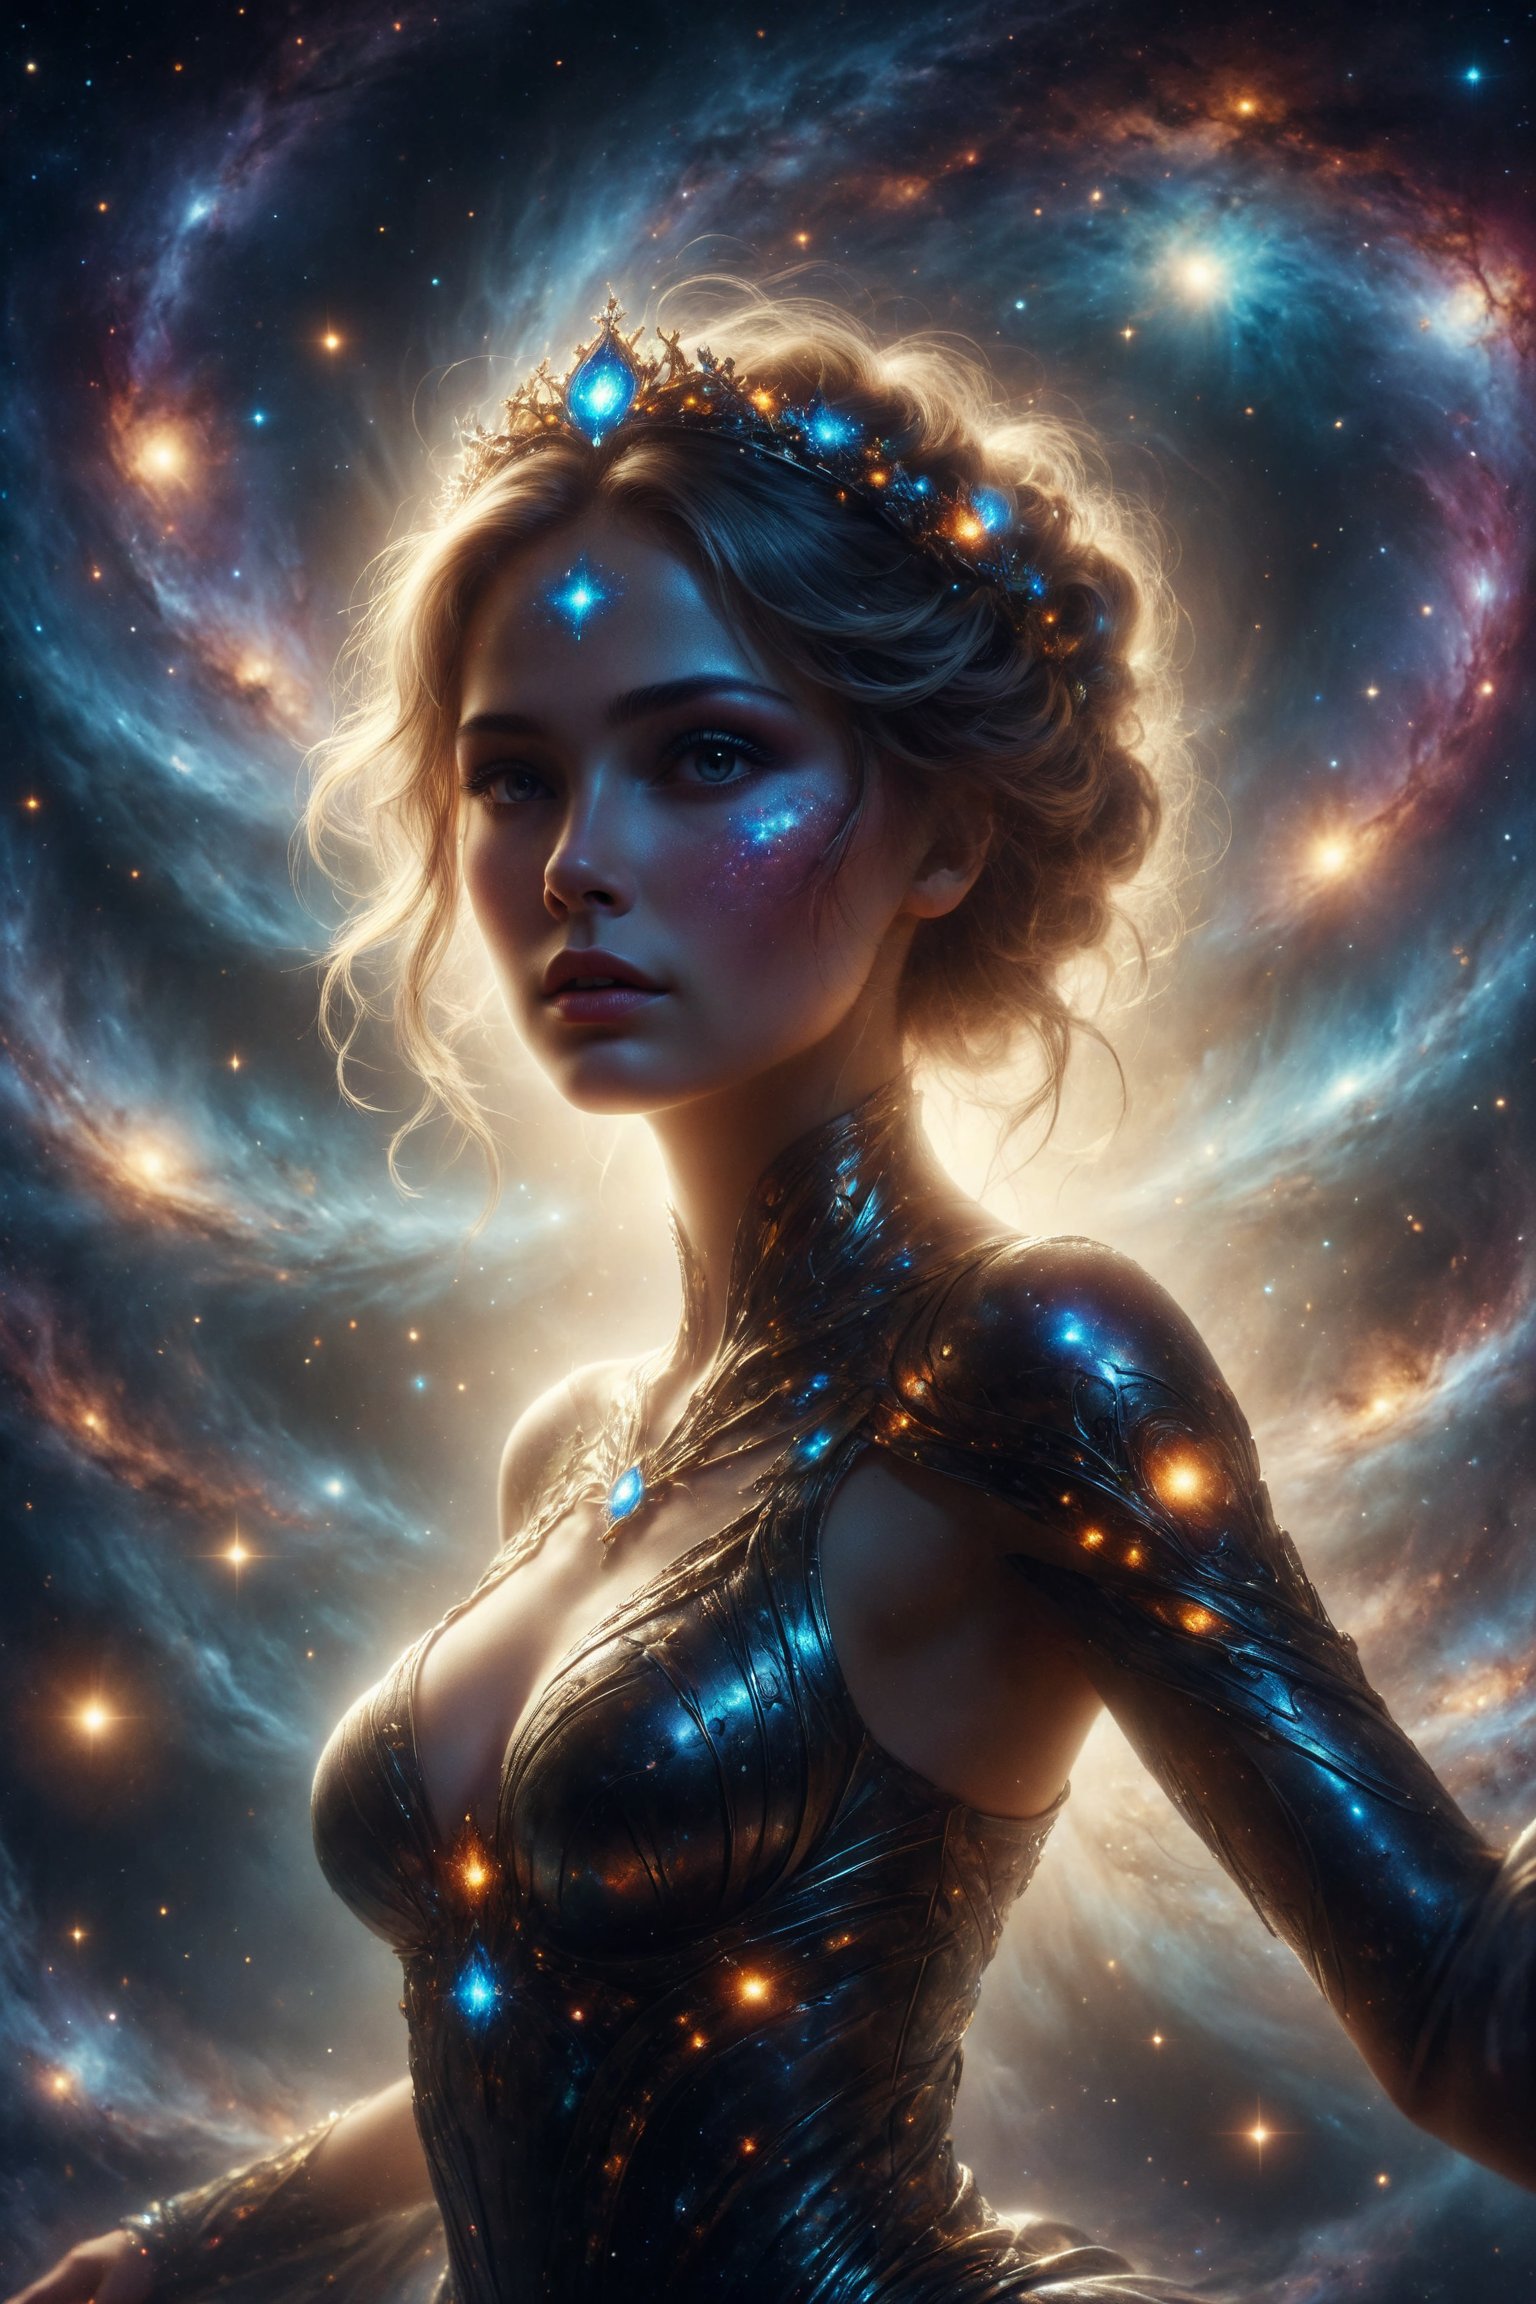 Queen of galaxia , Galaxia glows with the light of billions of stars, her form swirling like the spiral arms of a galaxy. She radiates a sense of vastness and cosmic unity.